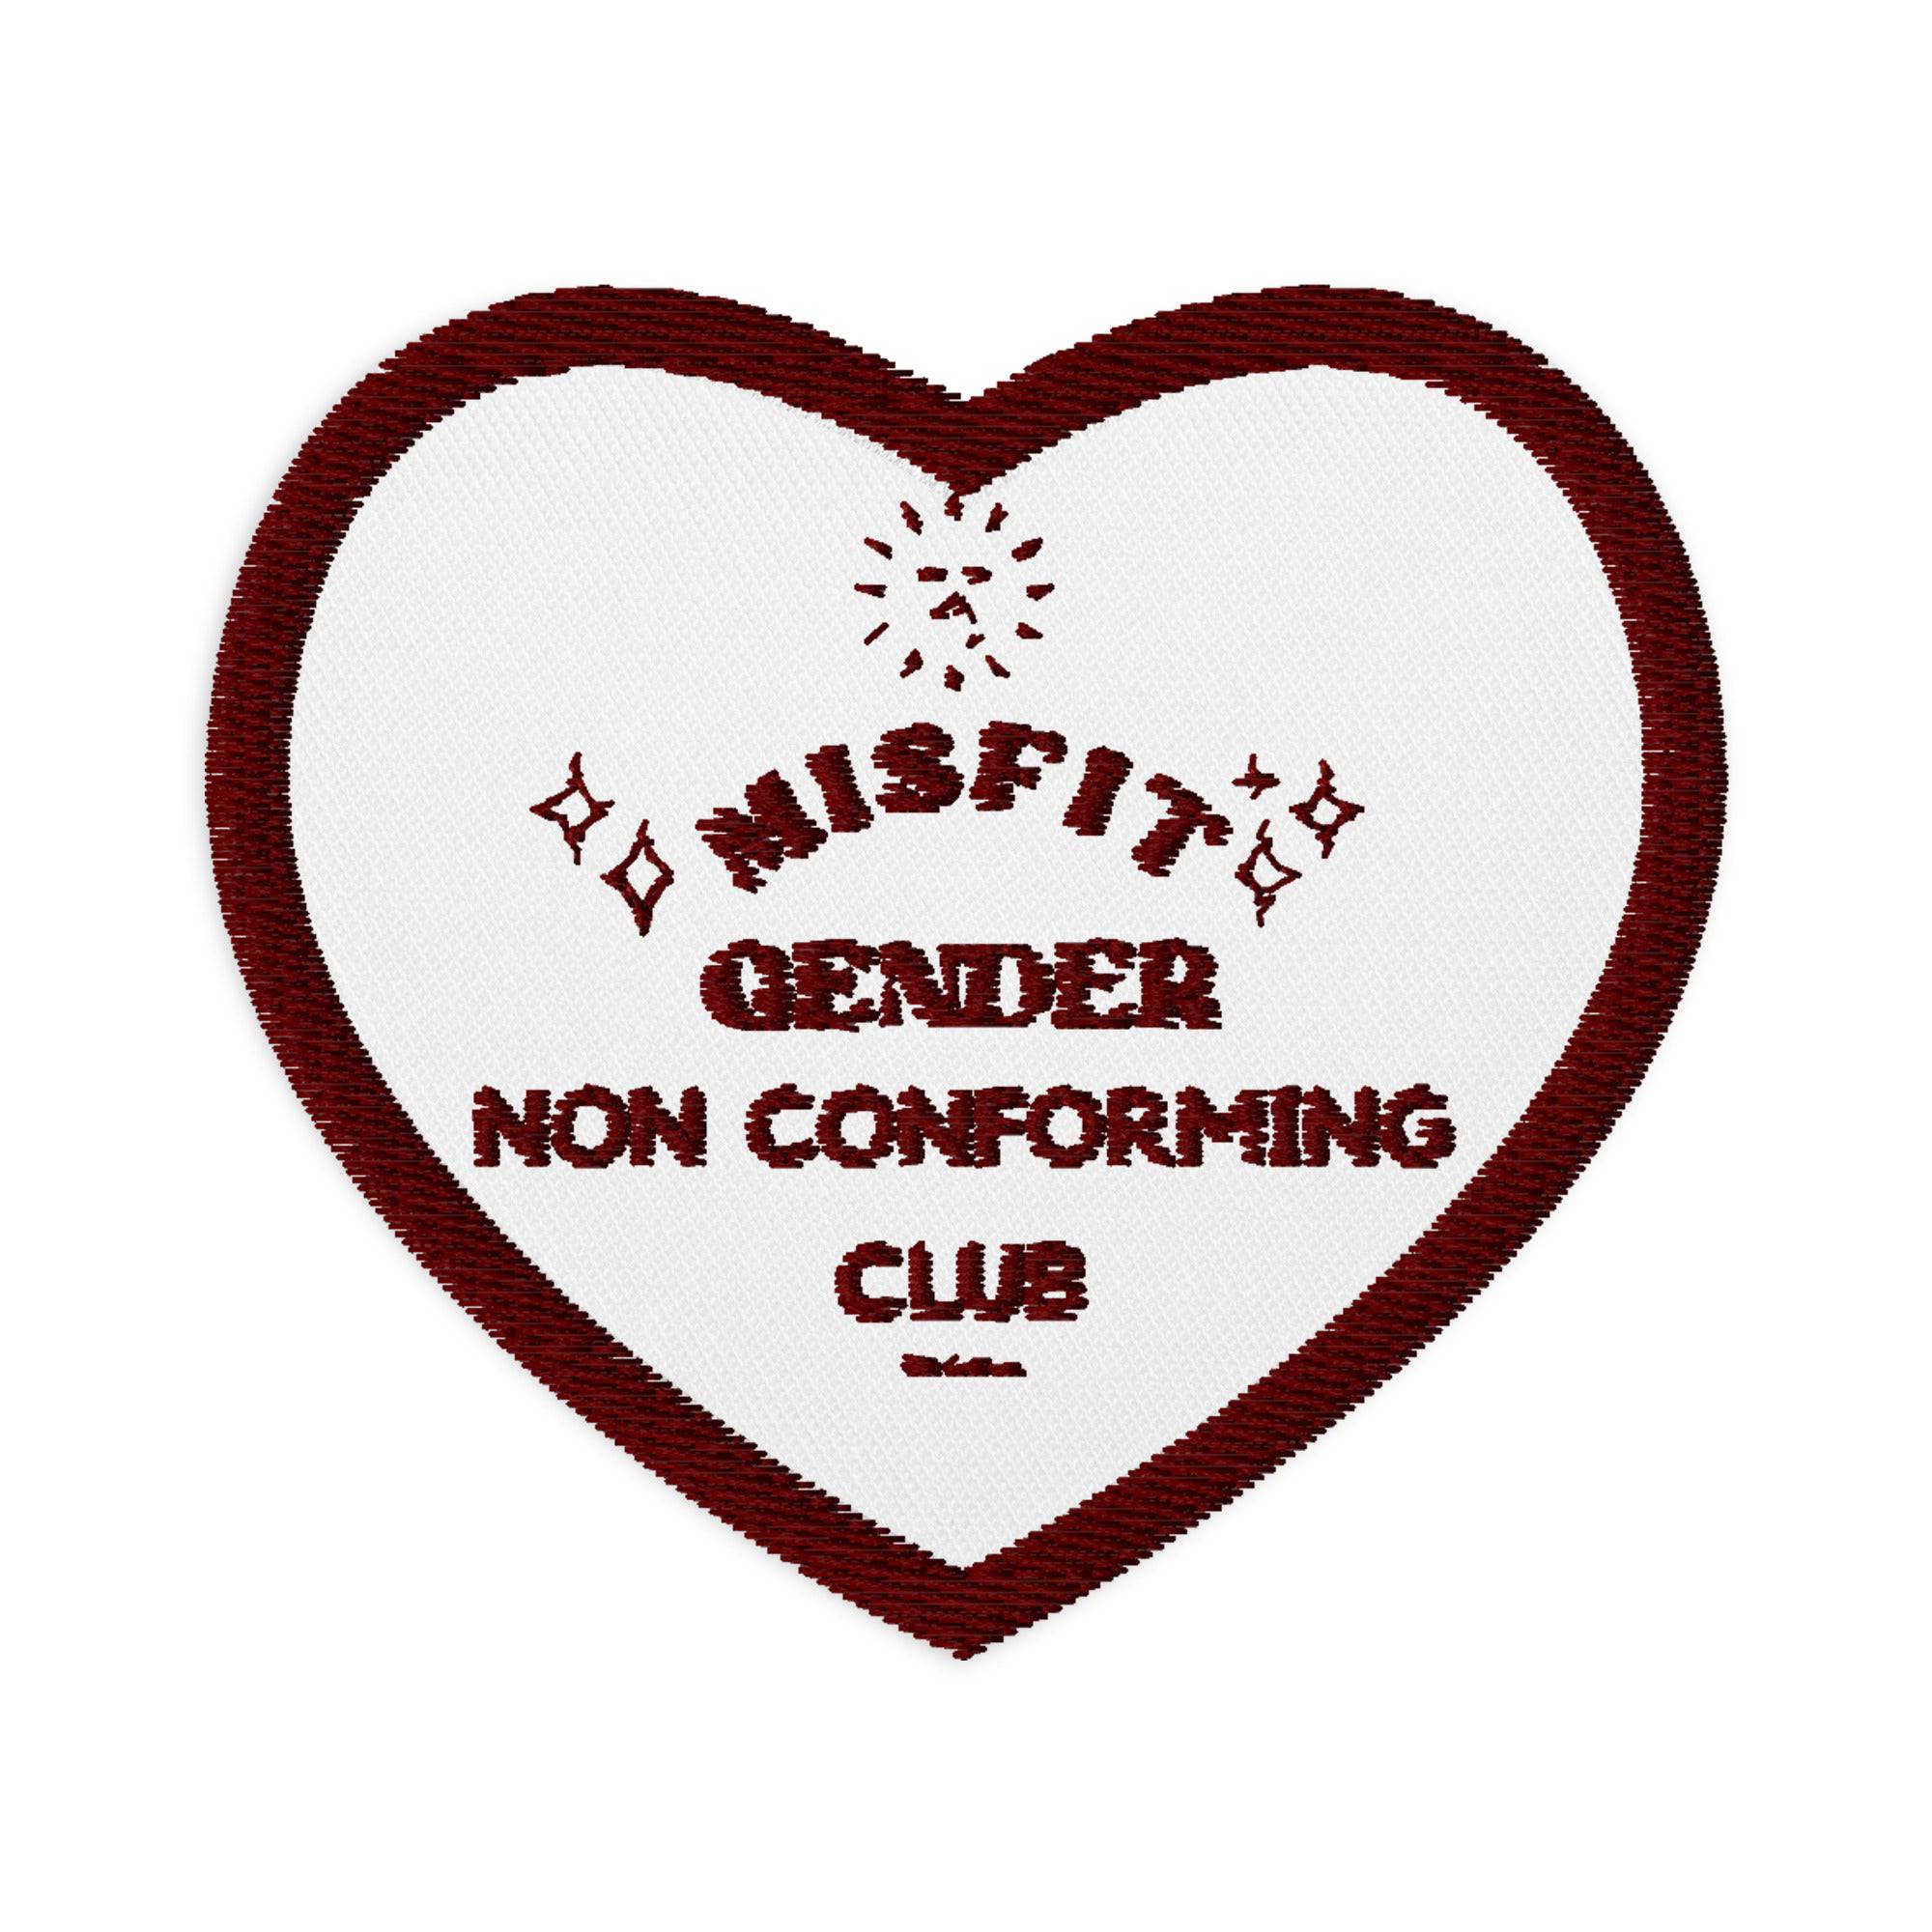 Misfit Gender Non Conforming Club Embroidered patch